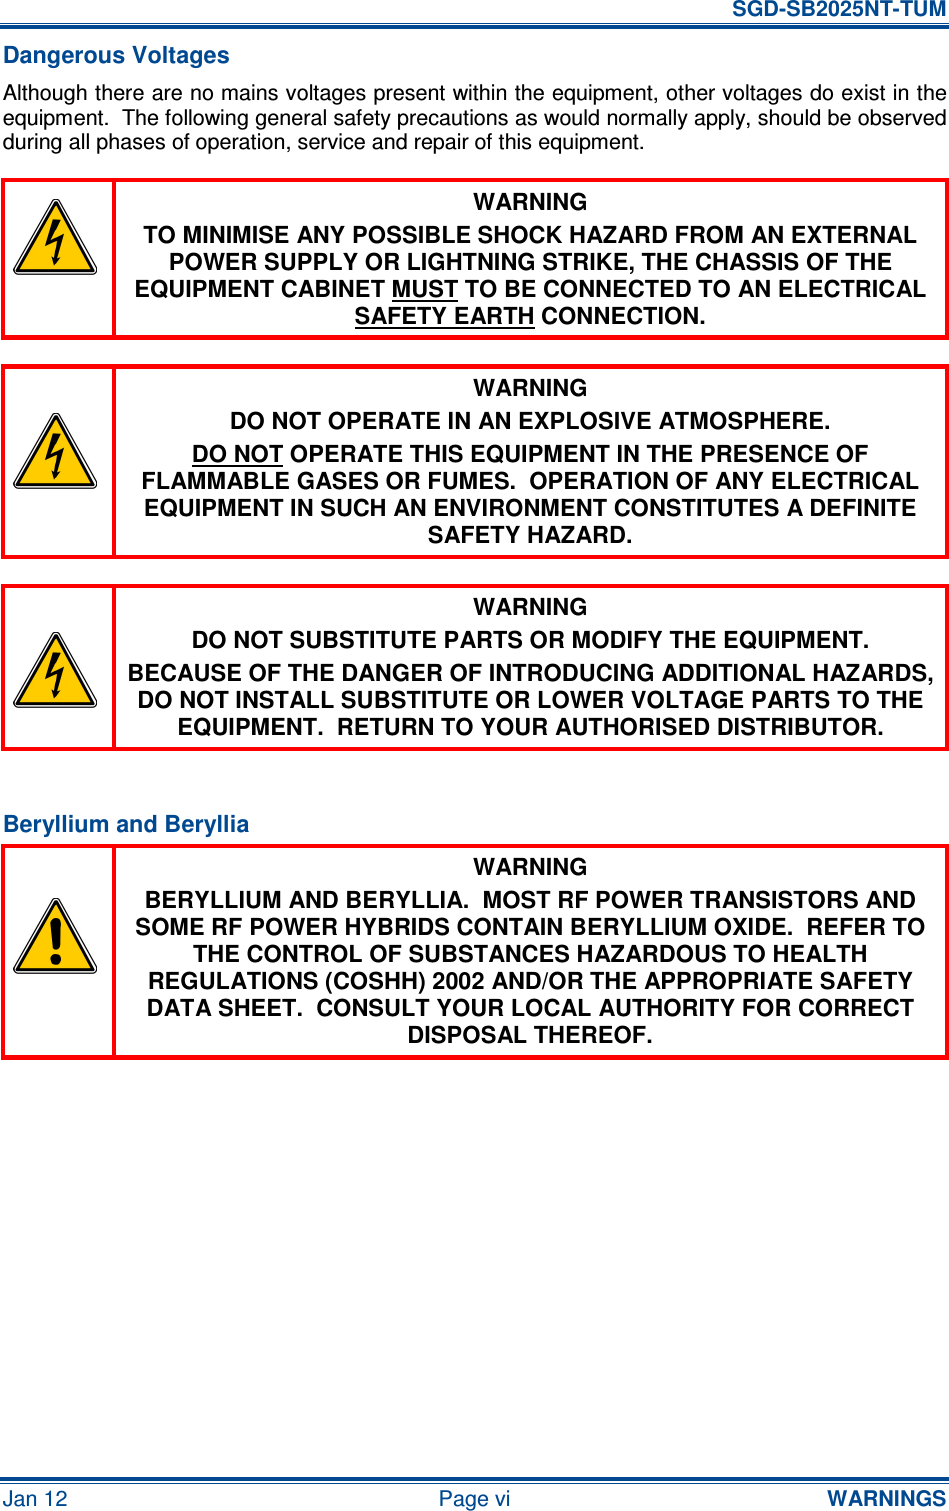   SGD-SB2025NT-TUM Jan 12  Page vi  WARNINGS Dangerous Voltages Although there are no mains voltages present within the equipment, other voltages do exist in the equipment.  The following general safety precautions as would normally apply, should be observed during all phases of operation, service and repair of this equipment.  WARNING TO MINIMISE ANY POSSIBLE SHOCK HAZARD FROM AN EXTERNAL POWER SUPPLY OR LIGHTNING STRIKE, THE CHASSIS OF THE EQUIPMENT CABINET MUST TO BE CONNECTED TO AN ELECTRICAL SAFETY EARTH CONNECTION.   WARNING DO NOT OPERATE IN AN EXPLOSIVE ATMOSPHERE. DO NOT OPERATE THIS EQUIPMENT IN THE PRESENCE OF FLAMMABLE GASES OR FUMES.  OPERATION OF ANY ELECTRICAL EQUIPMENT IN SUCH AN ENVIRONMENT CONSTITUTES A DEFINITE SAFETY HAZARD.   WARNING DO NOT SUBSTITUTE PARTS OR MODIFY THE EQUIPMENT. BECAUSE OF THE DANGER OF INTRODUCING ADDITIONAL HAZARDS, DO NOT INSTALL SUBSTITUTE OR LOWER VOLTAGE PARTS TO THE EQUIPMENT.  RETURN TO YOUR AUTHORISED DISTRIBUTOR.  Beryllium and Beryllia  WARNING BERYLLIUM AND BERYLLIA.  MOST RF POWER TRANSISTORS AND SOME RF POWER HYBRIDS CONTAIN BERYLLIUM OXIDE.  REFER TO THE CONTROL OF SUBSTANCES HAZARDOUS TO HEALTH REGULATIONS (COSHH) 2002 AND/OR THE APPROPRIATE SAFETY DATA SHEET.  CONSULT YOUR LOCAL AUTHORITY FOR CORRECT DISPOSAL THEREOF.  